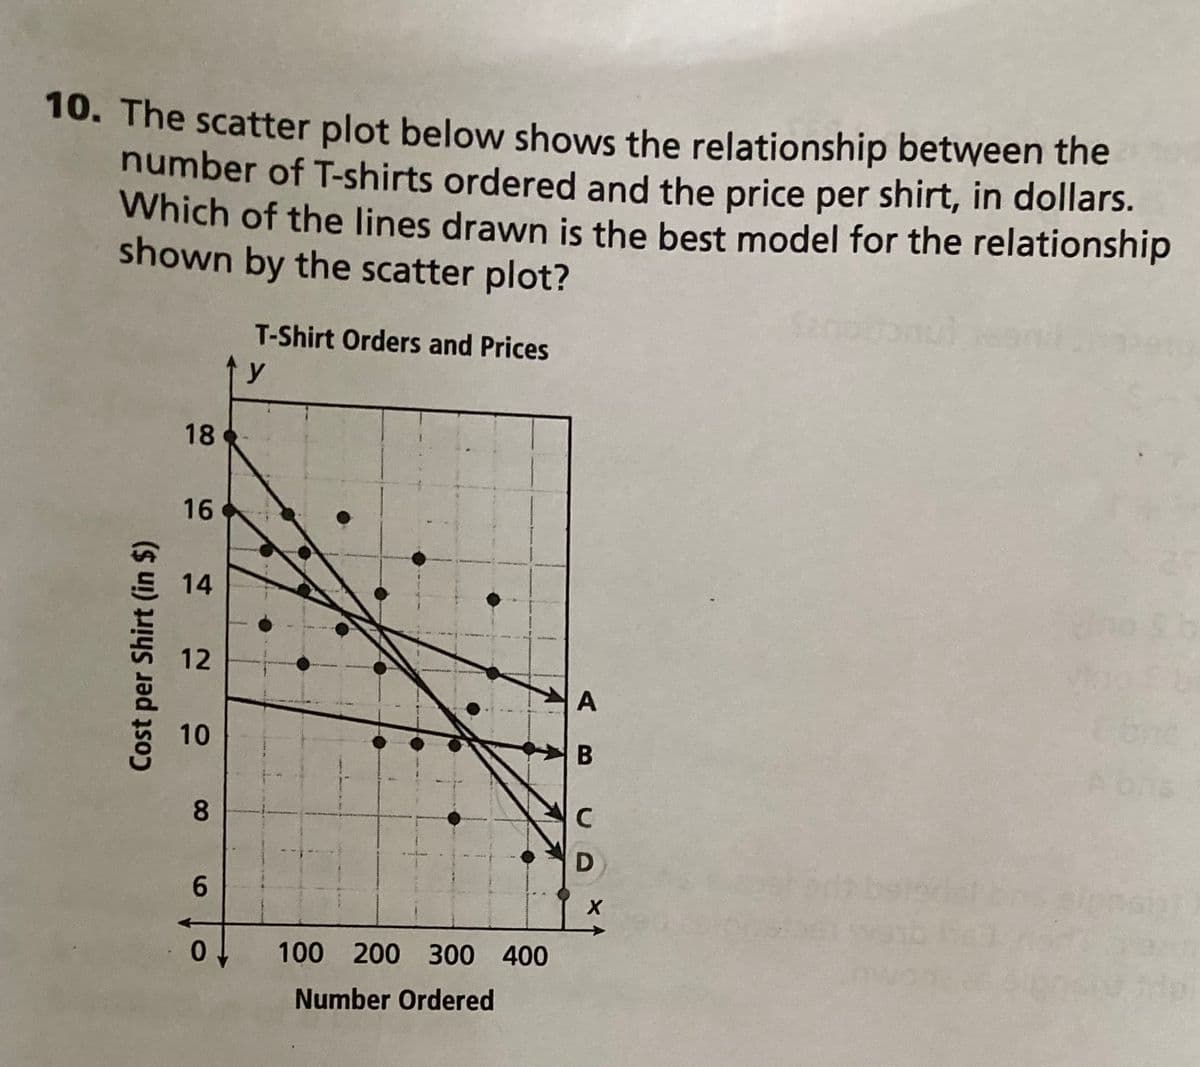 10. The scatter plot below shows the relationship between the
number of T-shirts ordered and the price per shirt, in dollars.
Which of the lines drawn is the best model for the relationship
shown by the scatter plot?
y
T-Shirt Orders and Prices
Cost per Shirt (in $)
18
16
14
12
10
8
AB
C
D
6
X
0
100 200 300 400
Number Ordered